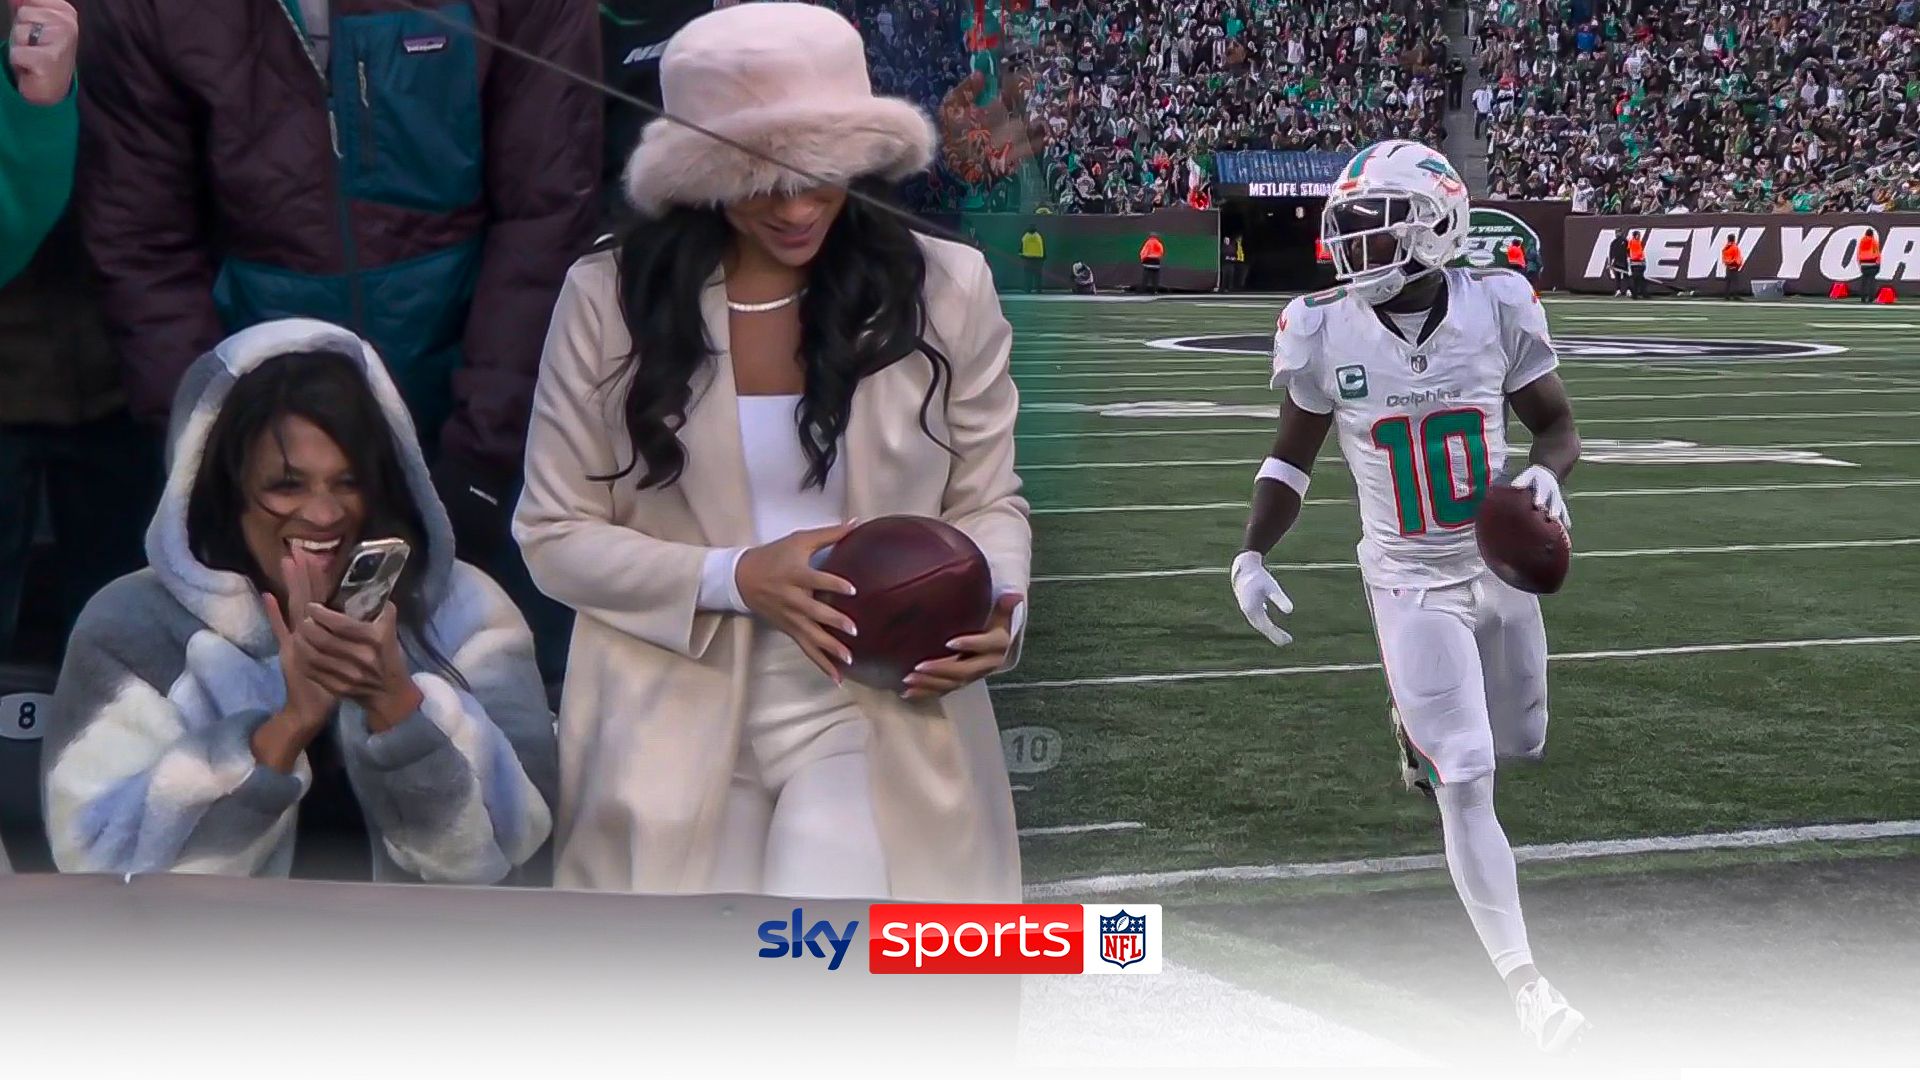 Hill Scores Td Then Hands Ball To His Newlywed Wife 15 Minute News